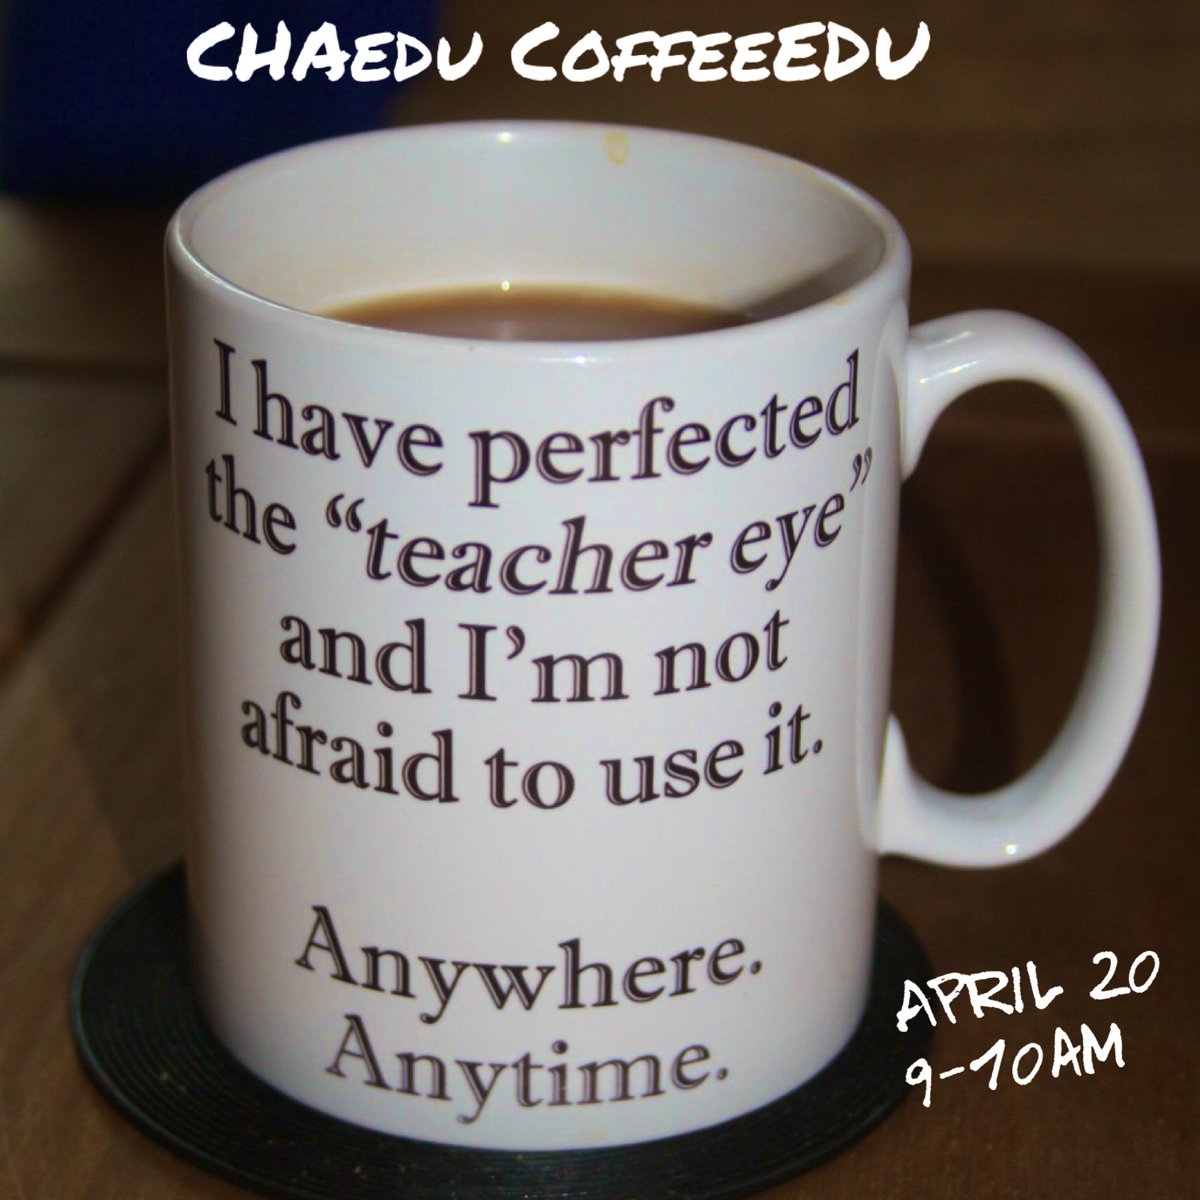 Good morning! Hope to see some new faces at #chaEDU #coffeeEDU meetup today at @CJDDonuts 9-10am